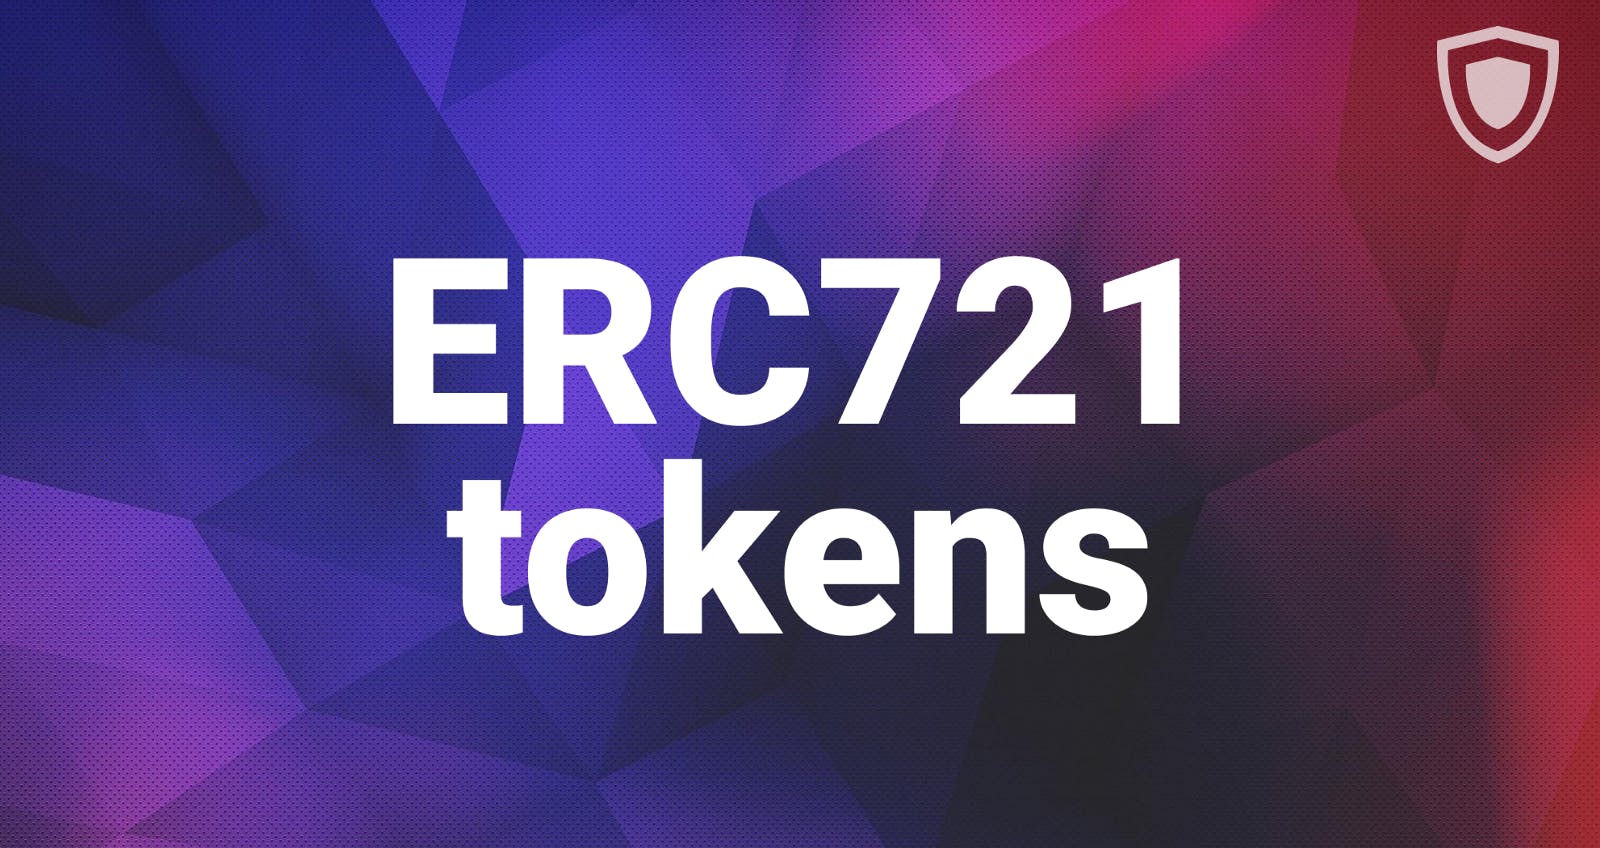 /what-are-erc721-standard-tokens-3624adcc3e54 feature image